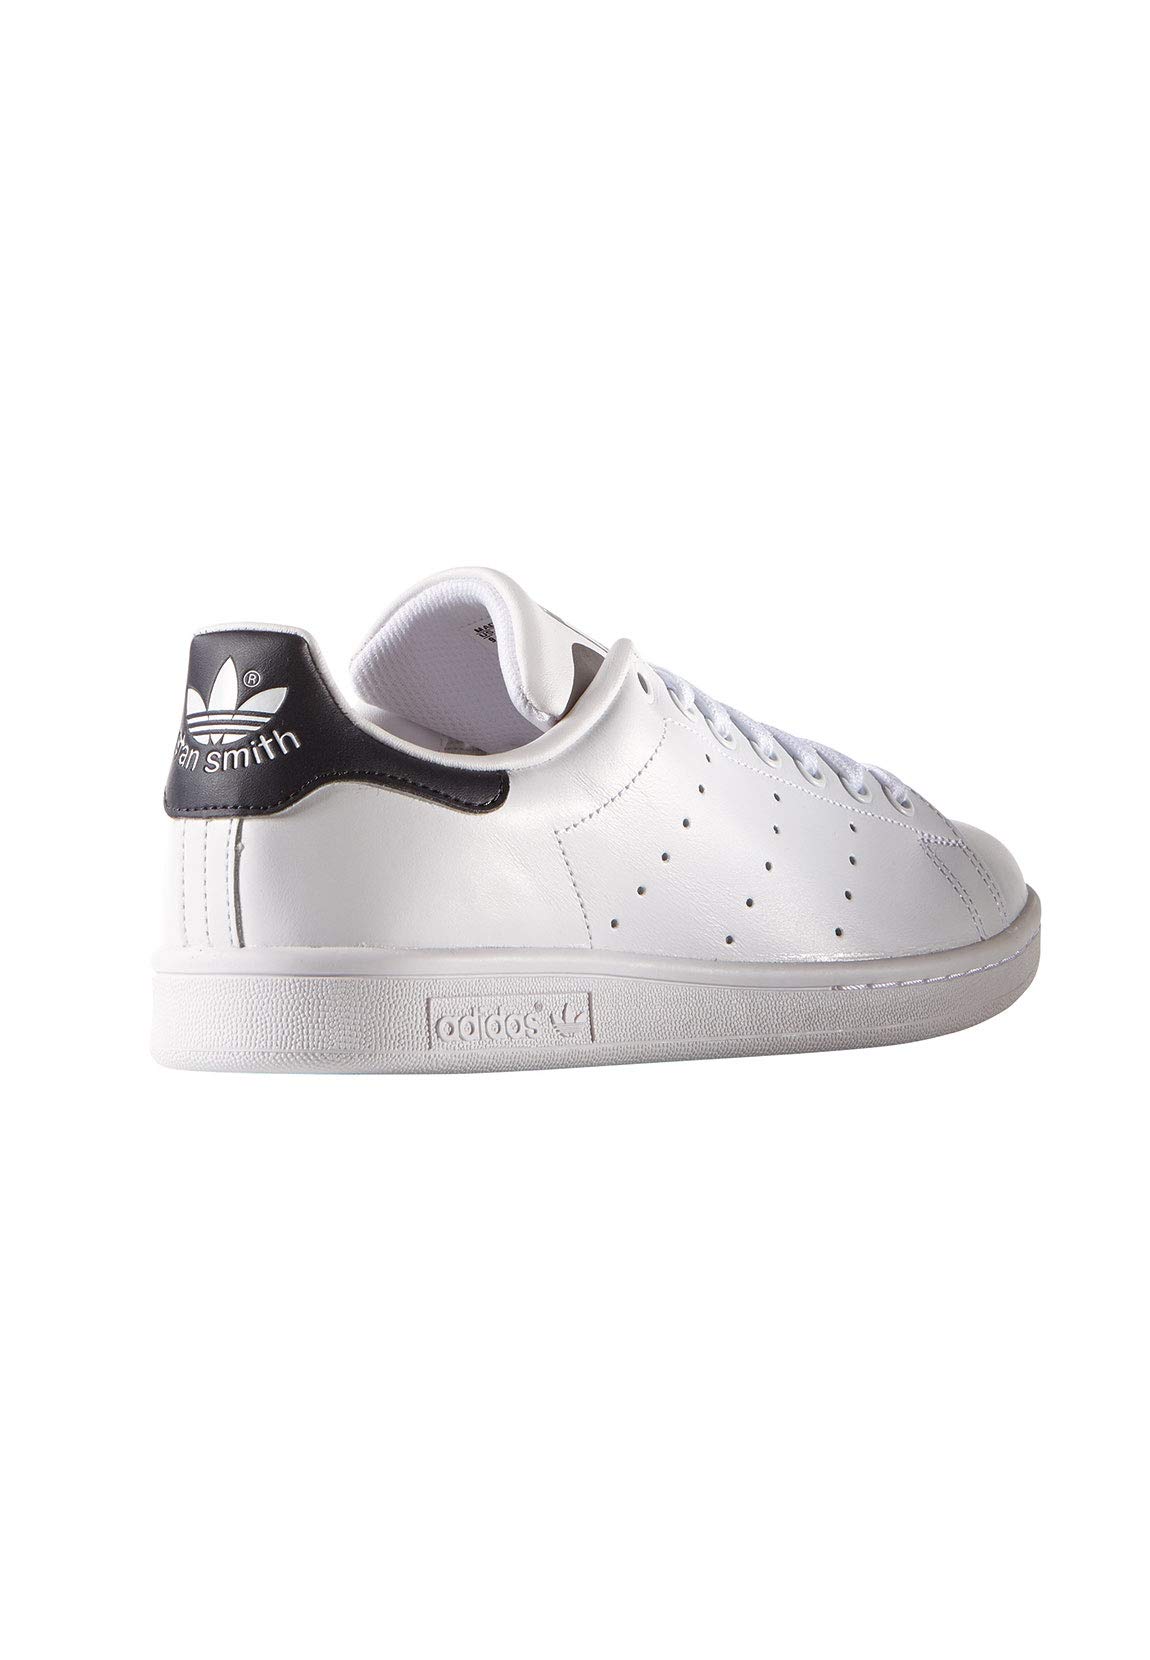 Adidas Stan Smith White Mens Trainers Size 7.5 UK